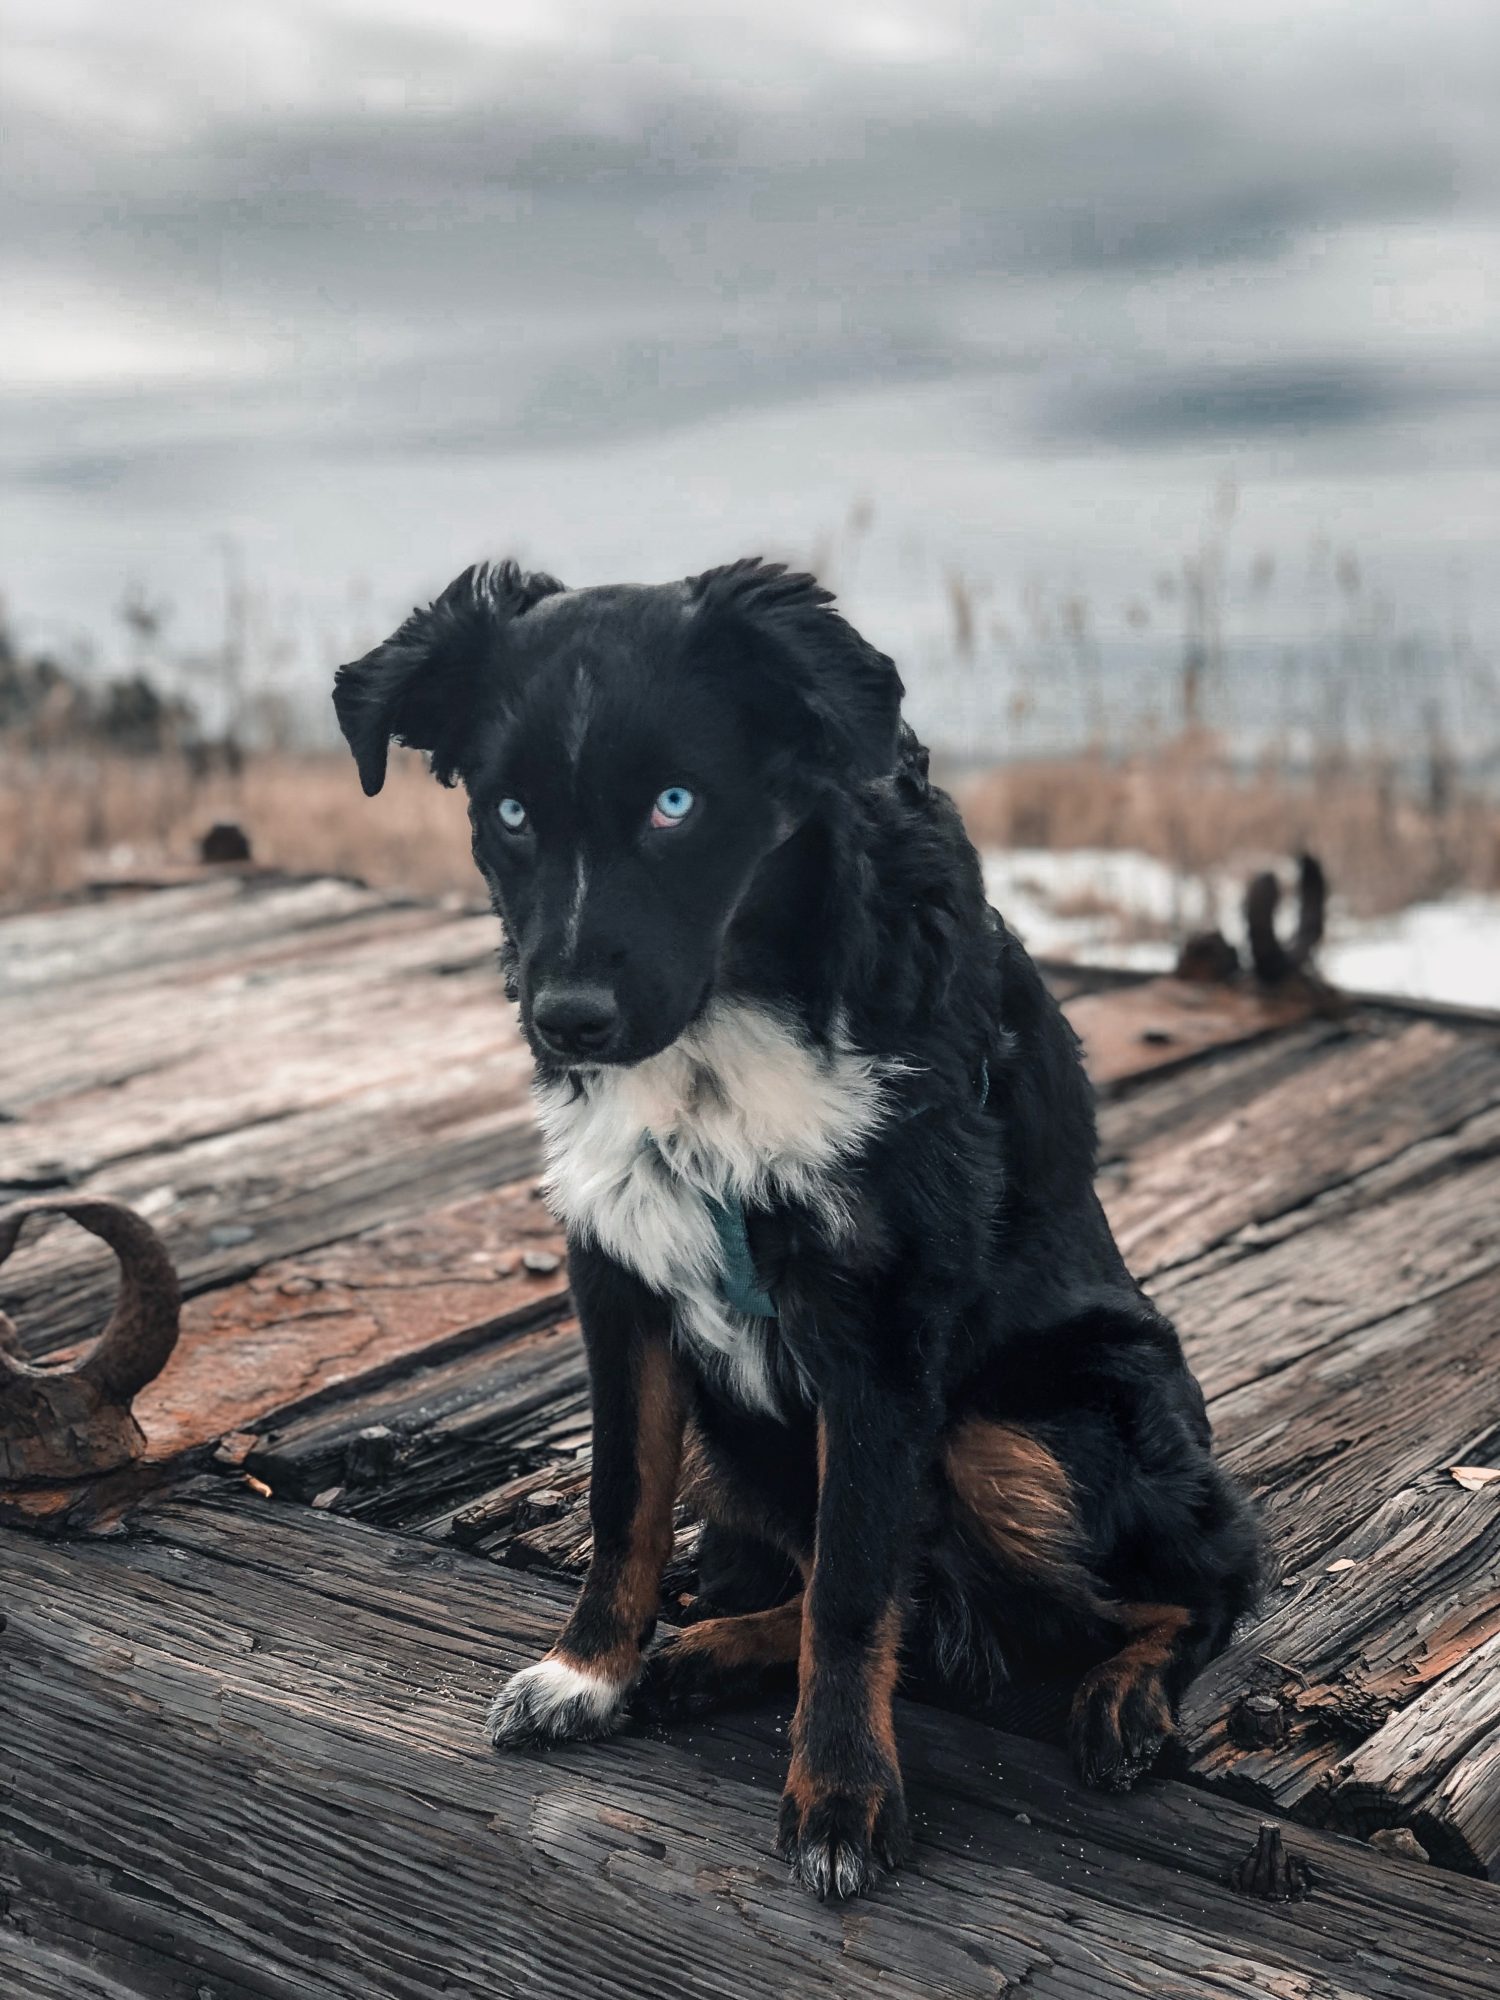 How to Level Up Your Pet Photos | Pet Photography Tips by popular New England photographer, Shannon Shipman: image of a black, white, and brown puppy with blue eyes sitting on a dock at the beach.